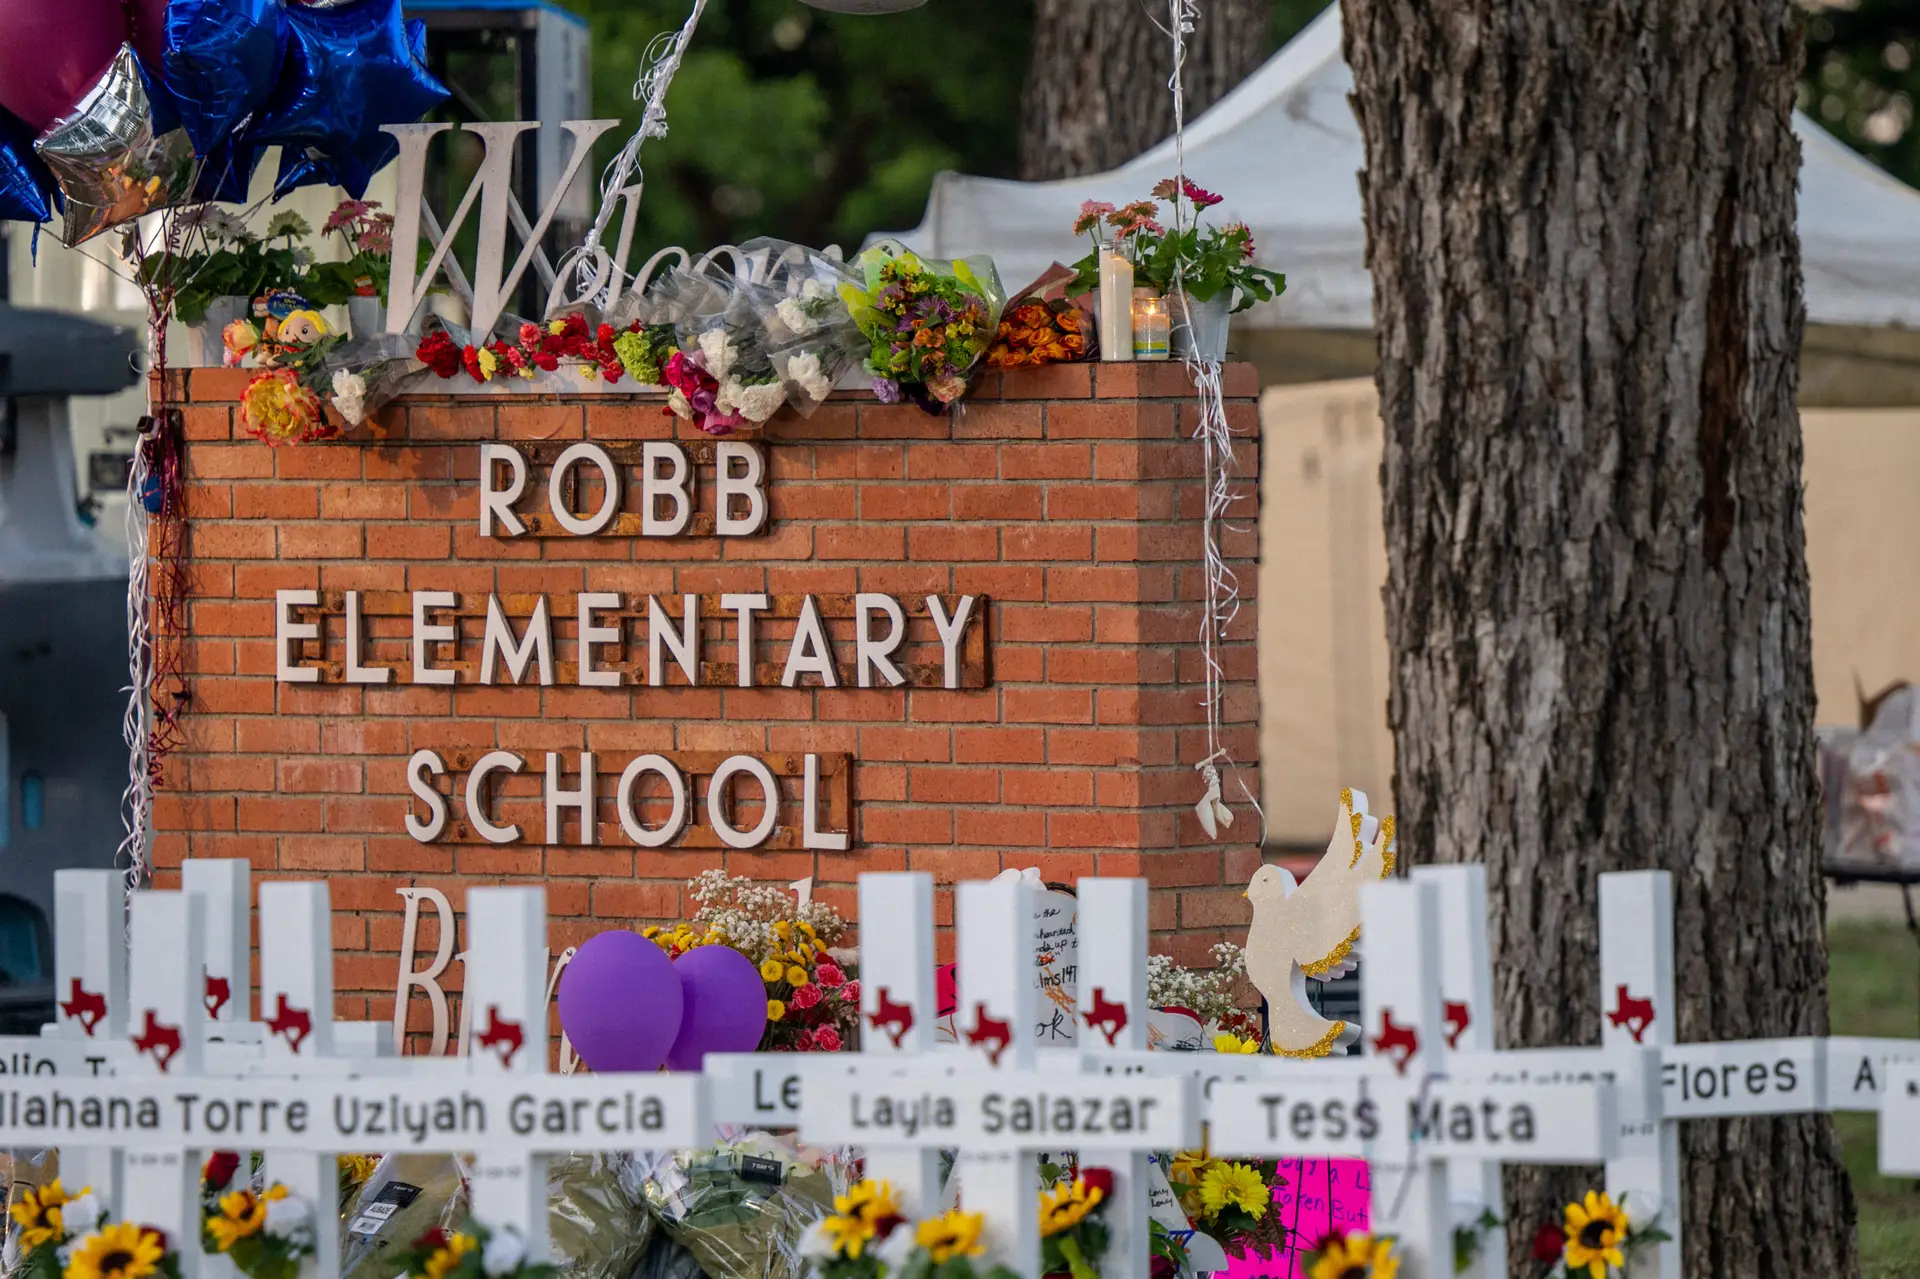 UVALDE, TEXAS – MAY 26: A memorial is seen surrounding the Robb Elementary School sign following the mass shooting at Robb Elementary School on May 26, 2022 in Uvalde, Texas. According to reports, 19 students and 2 adults were killed, with the gunman fatally shot by law enforcement. (Photo by Brandon Bell/Getty Images)